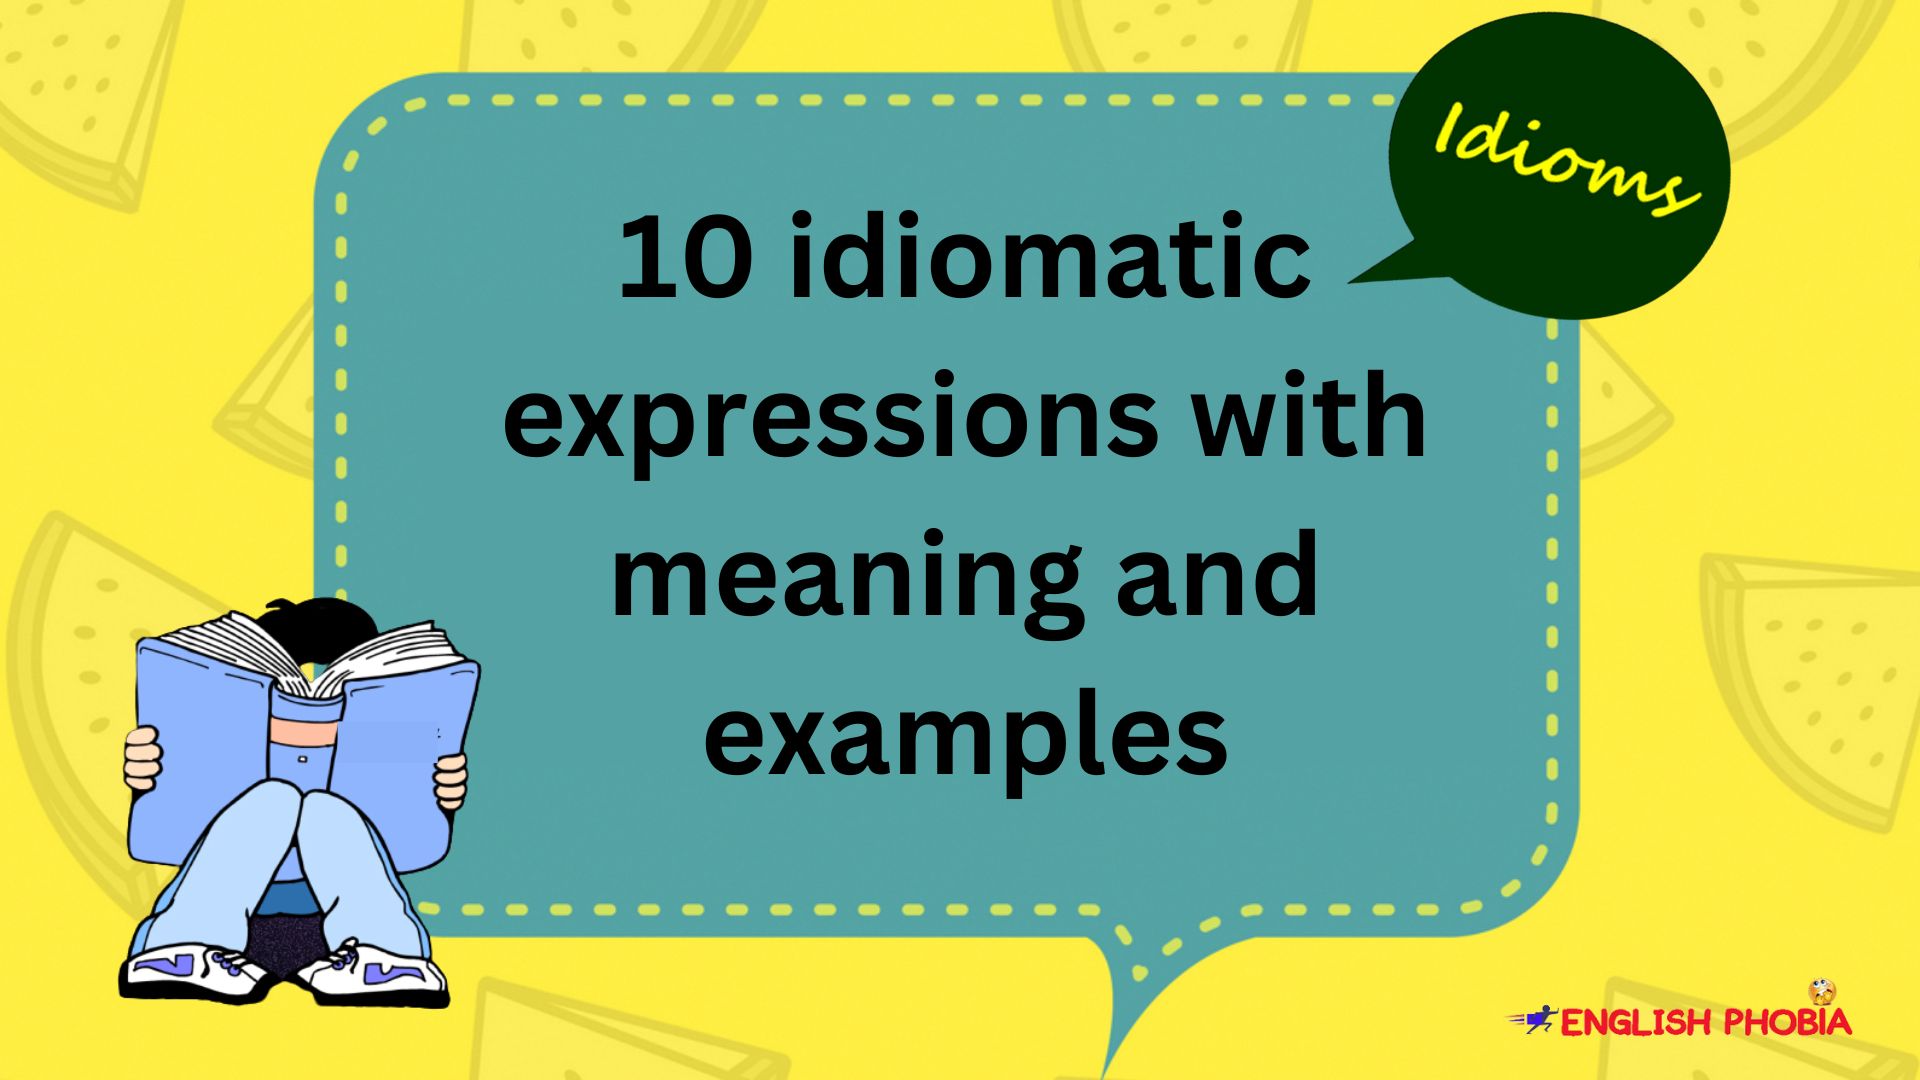 10 idiomatic expressions with meaning and examples